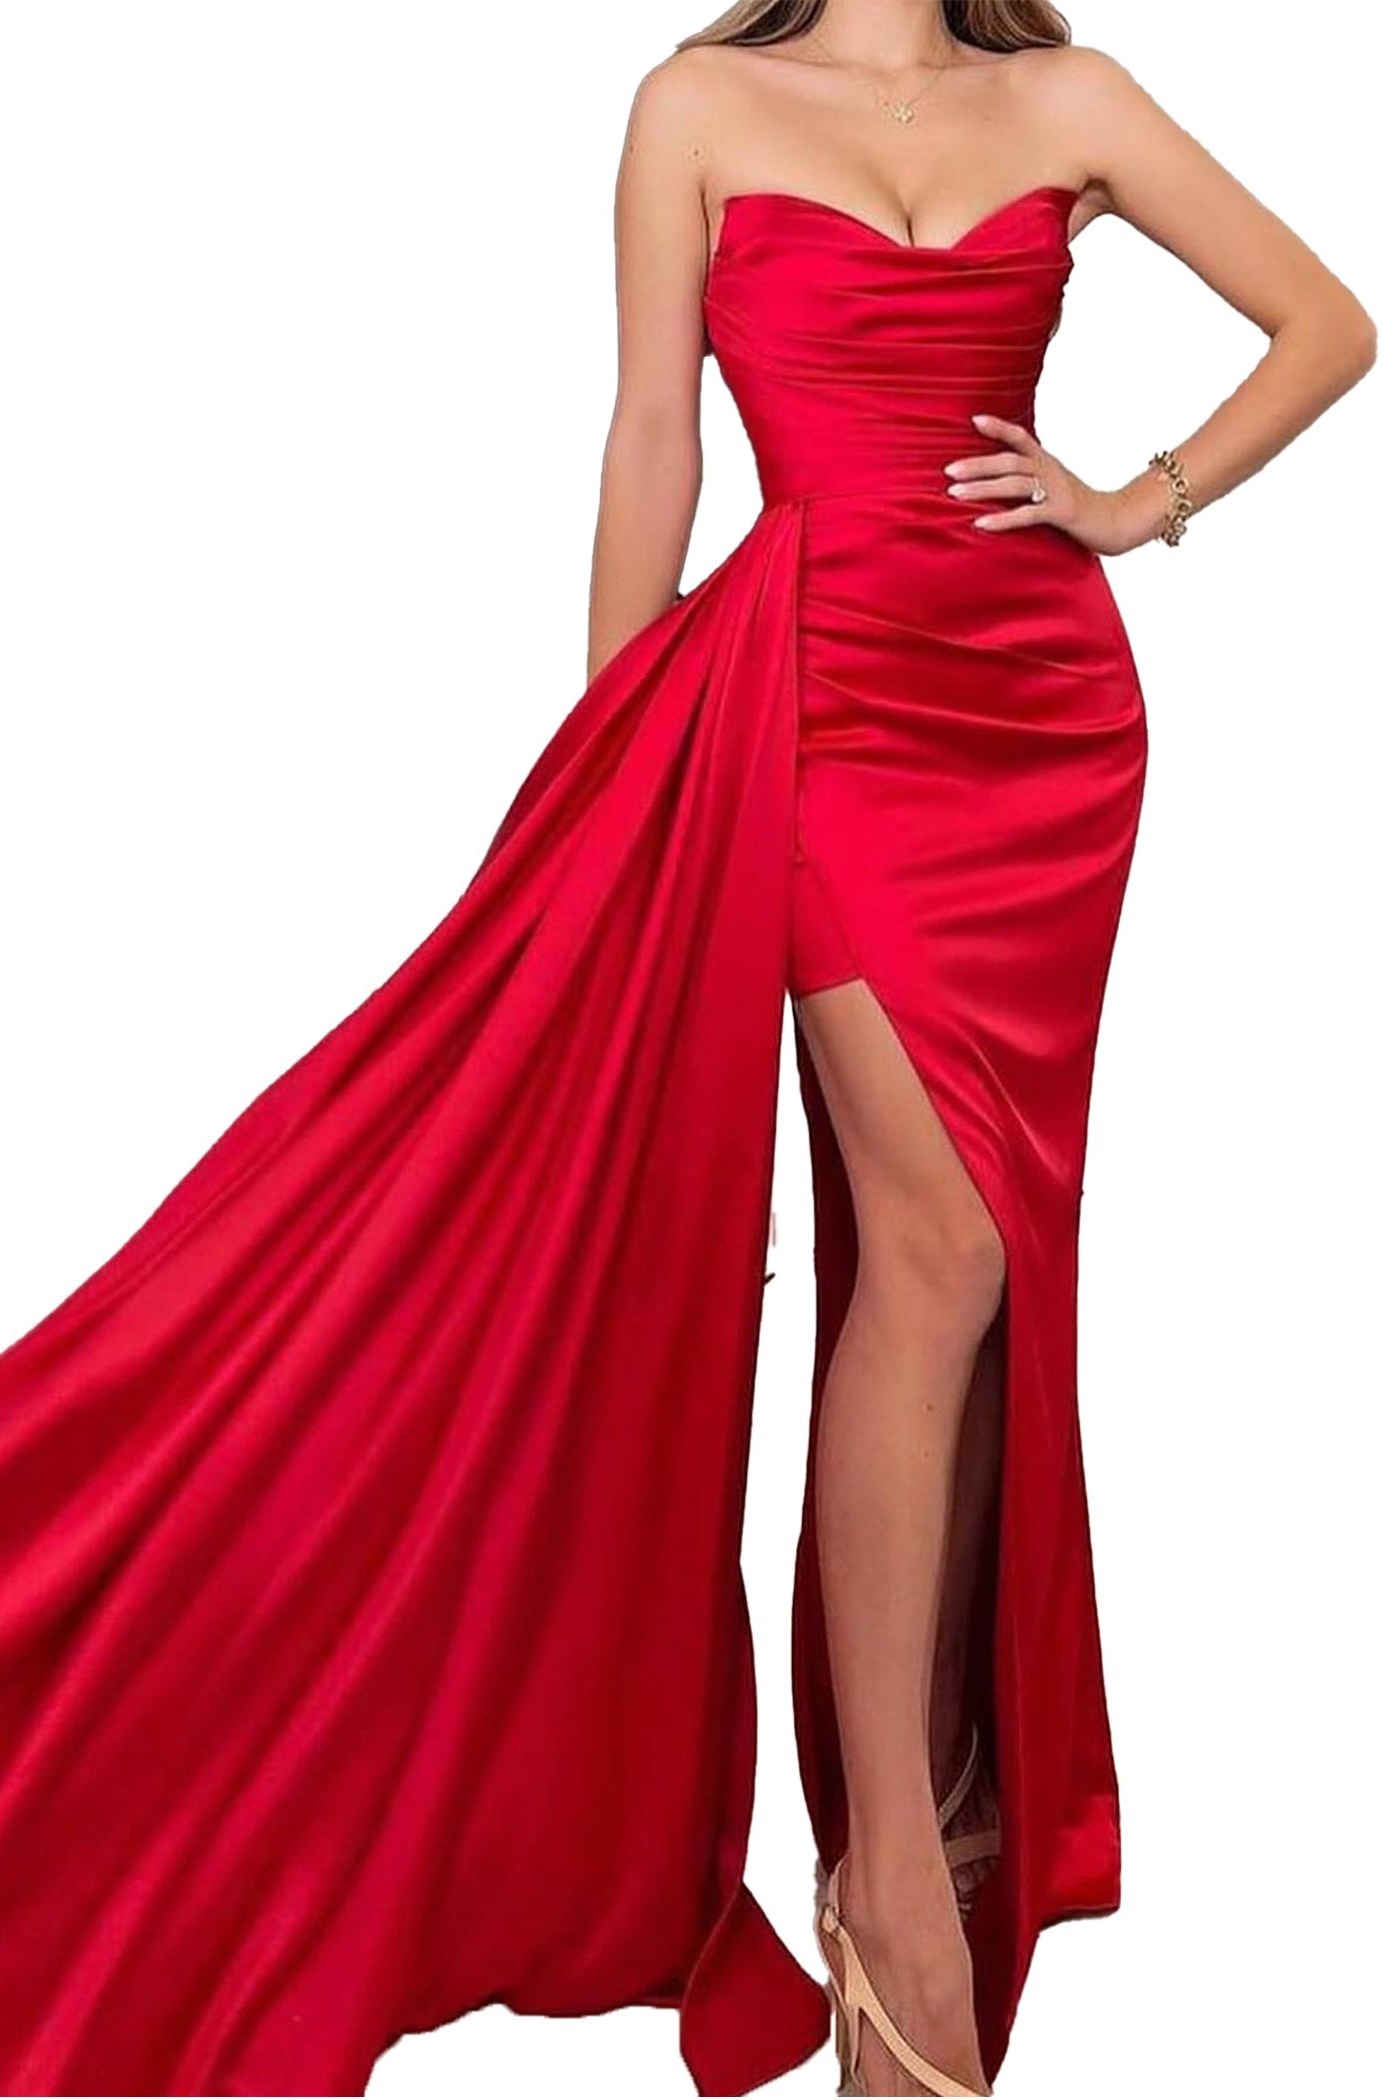 Red Sleeveless Prom Dress Long Slit With Trailing YH0052